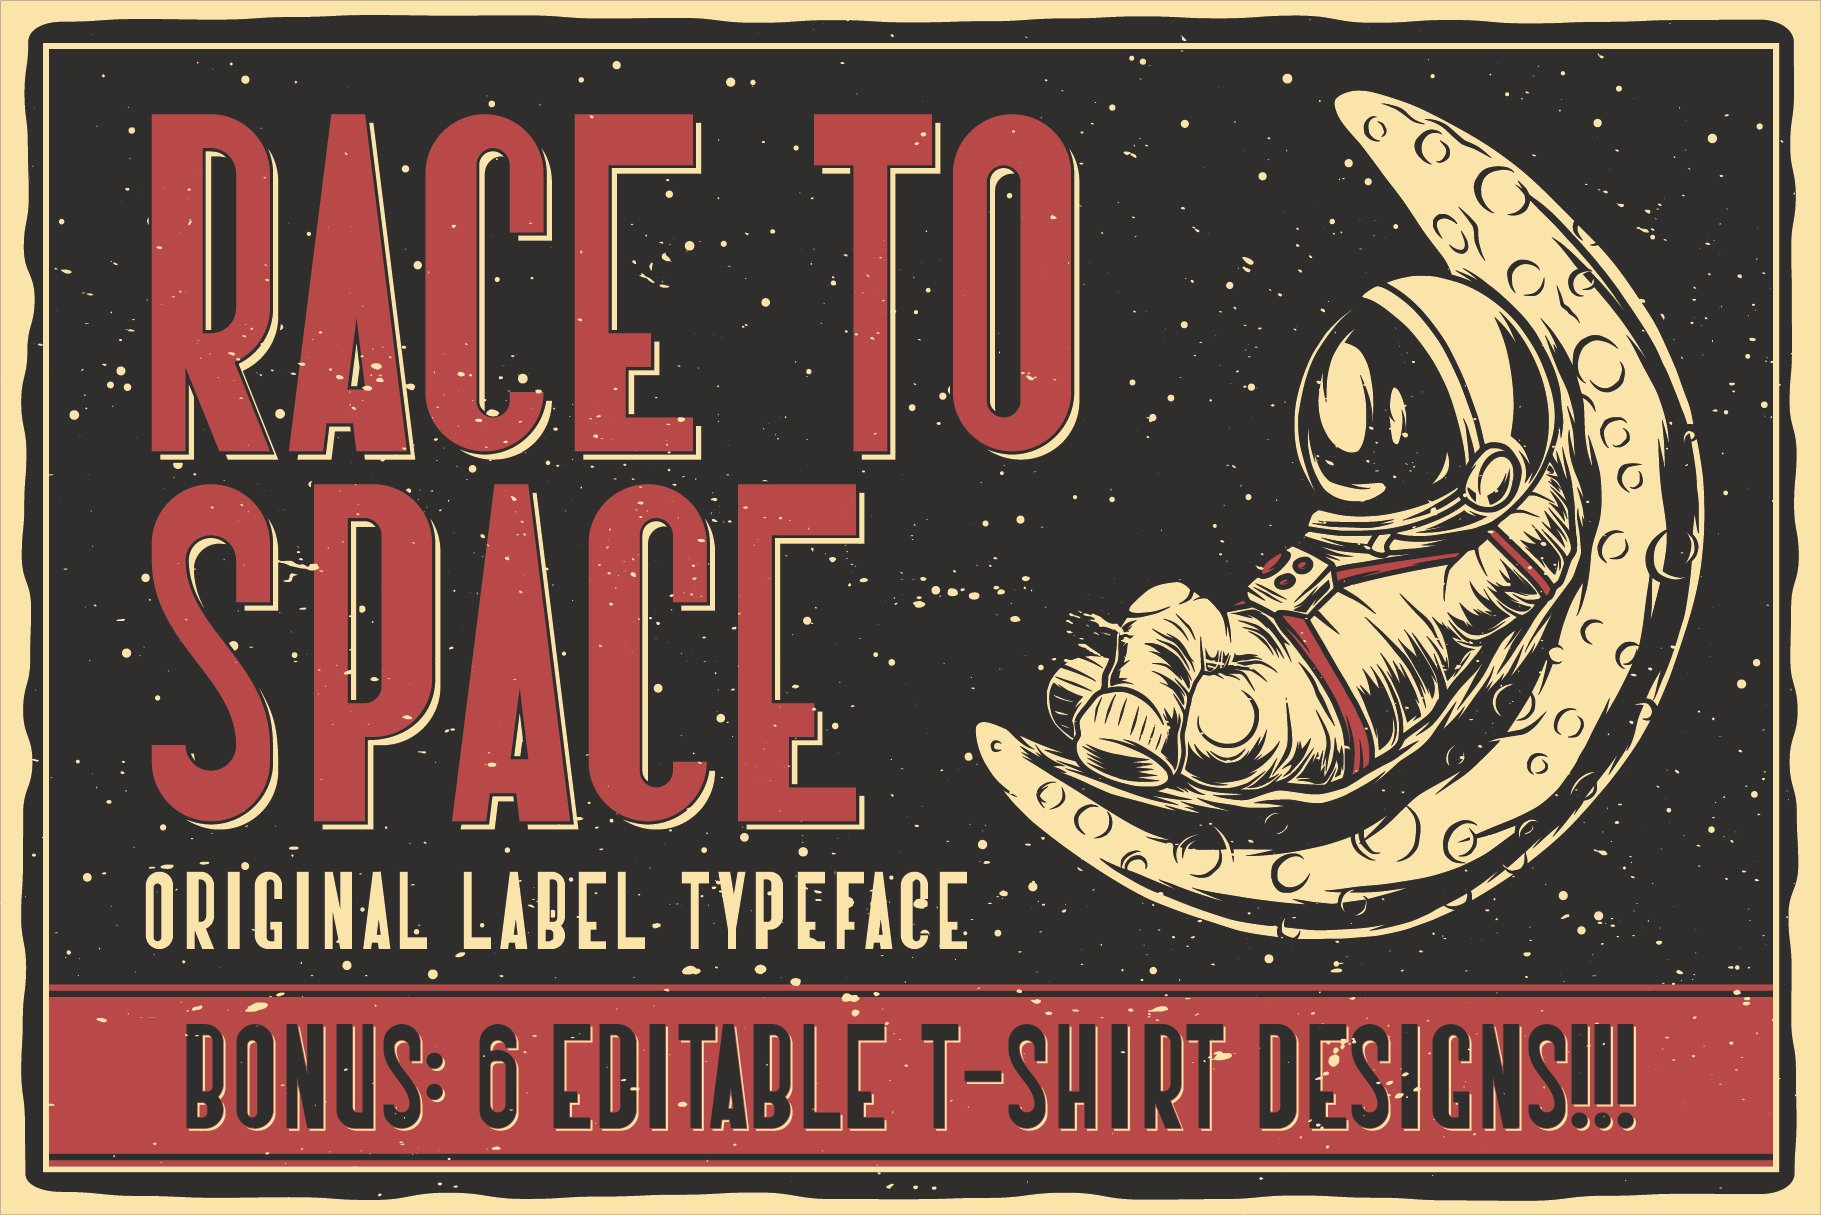 Vintage illustration with retro style typeface.